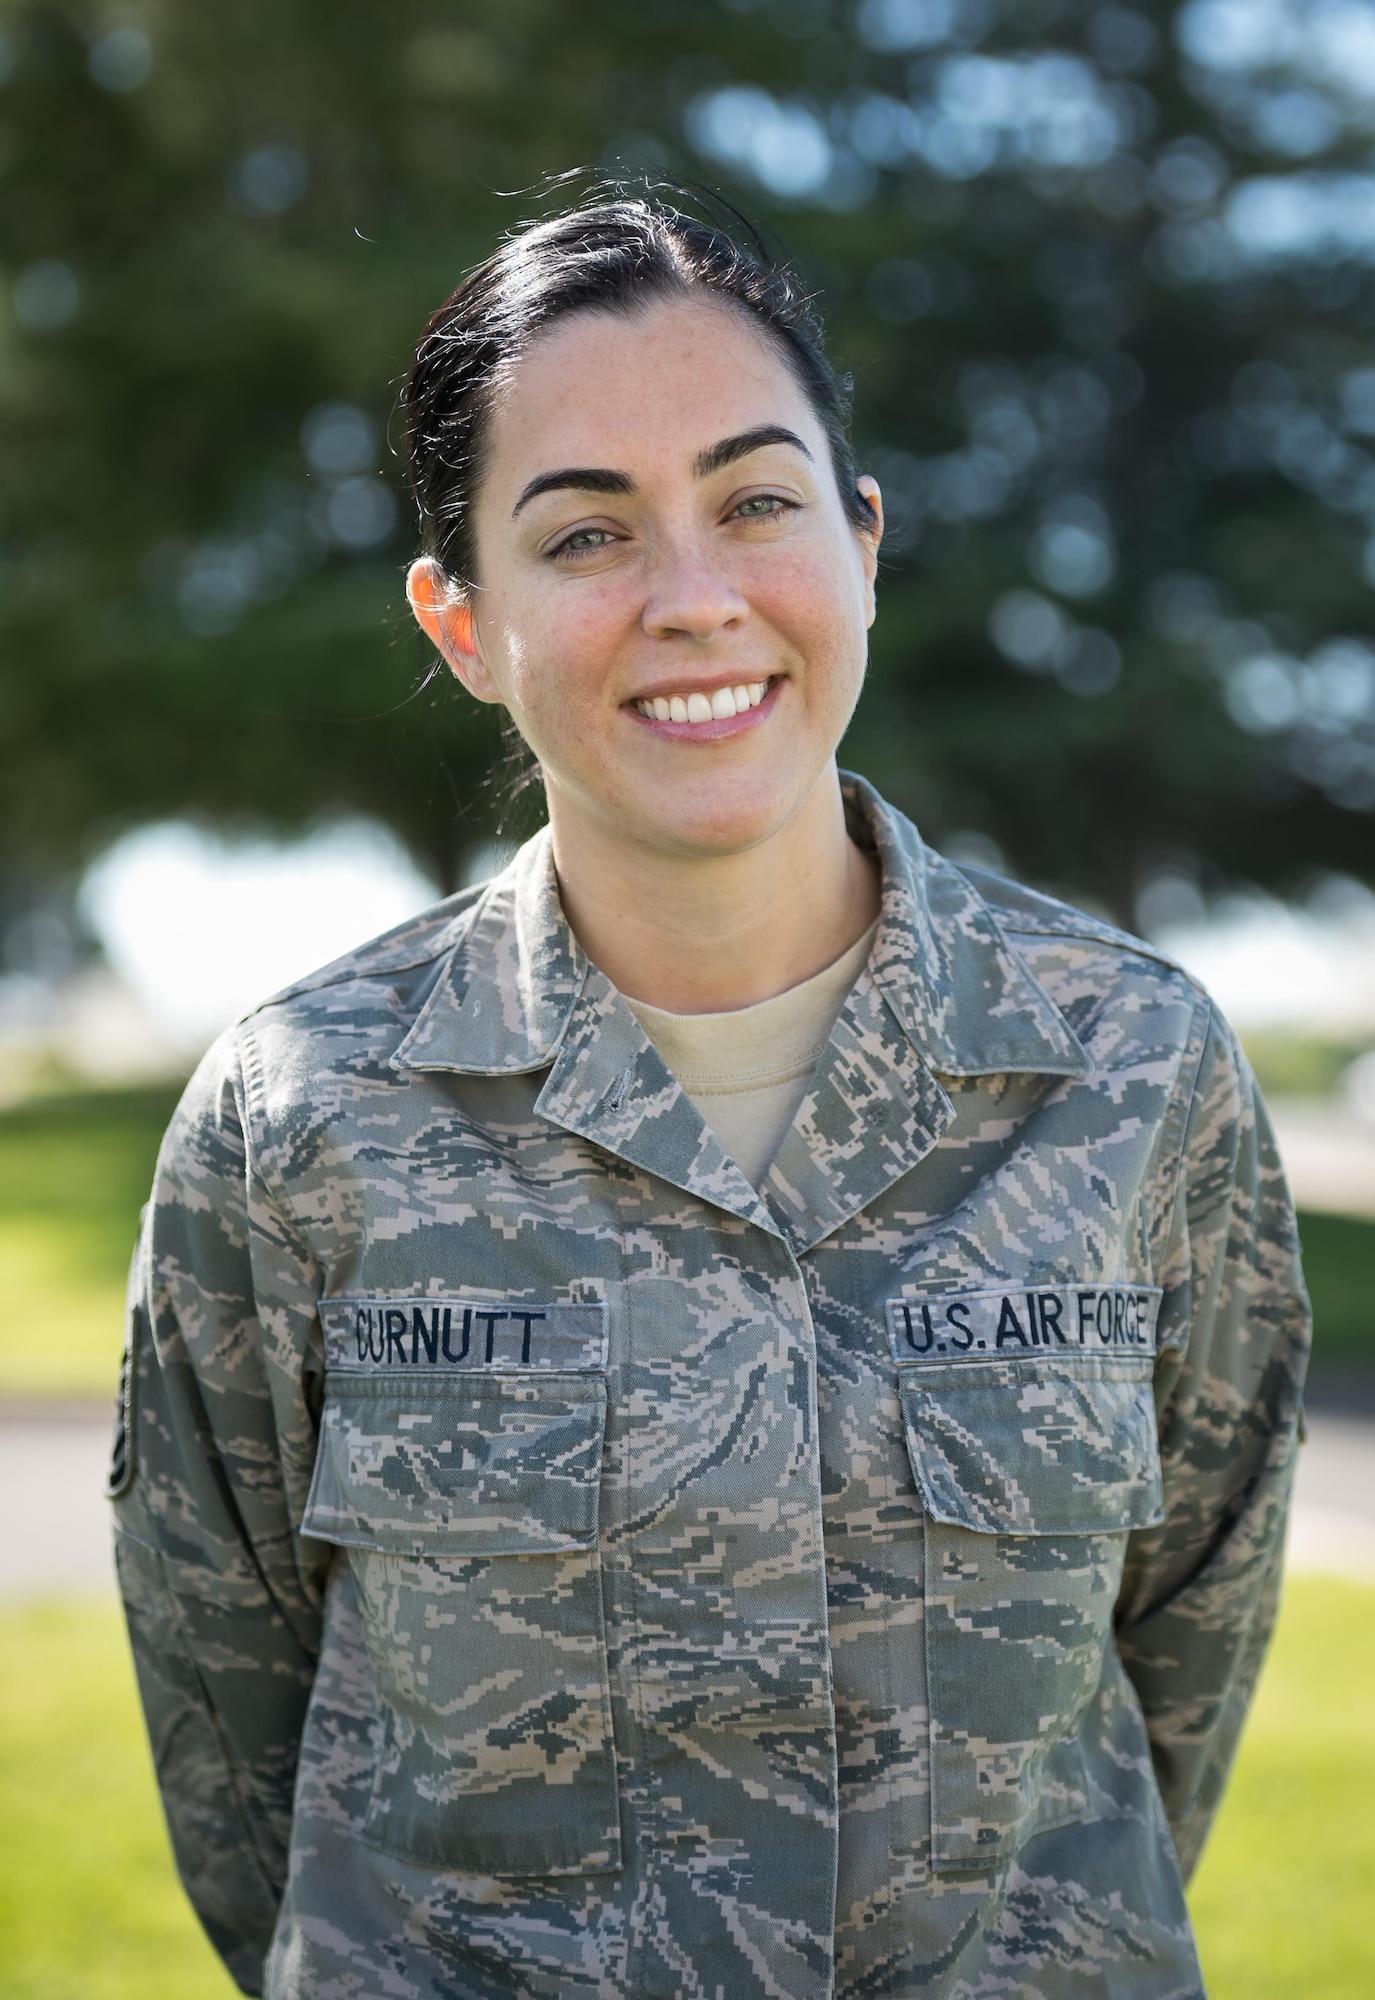 Master Sgt. Kellie Curnutt, 940th Aerospace Medicine Squadron superintendent, poses for a photo at Beale Air Force Base, California on March 12, 2017. (U.S. Air Force photo by, Staff Sgt. Brenda Davis)